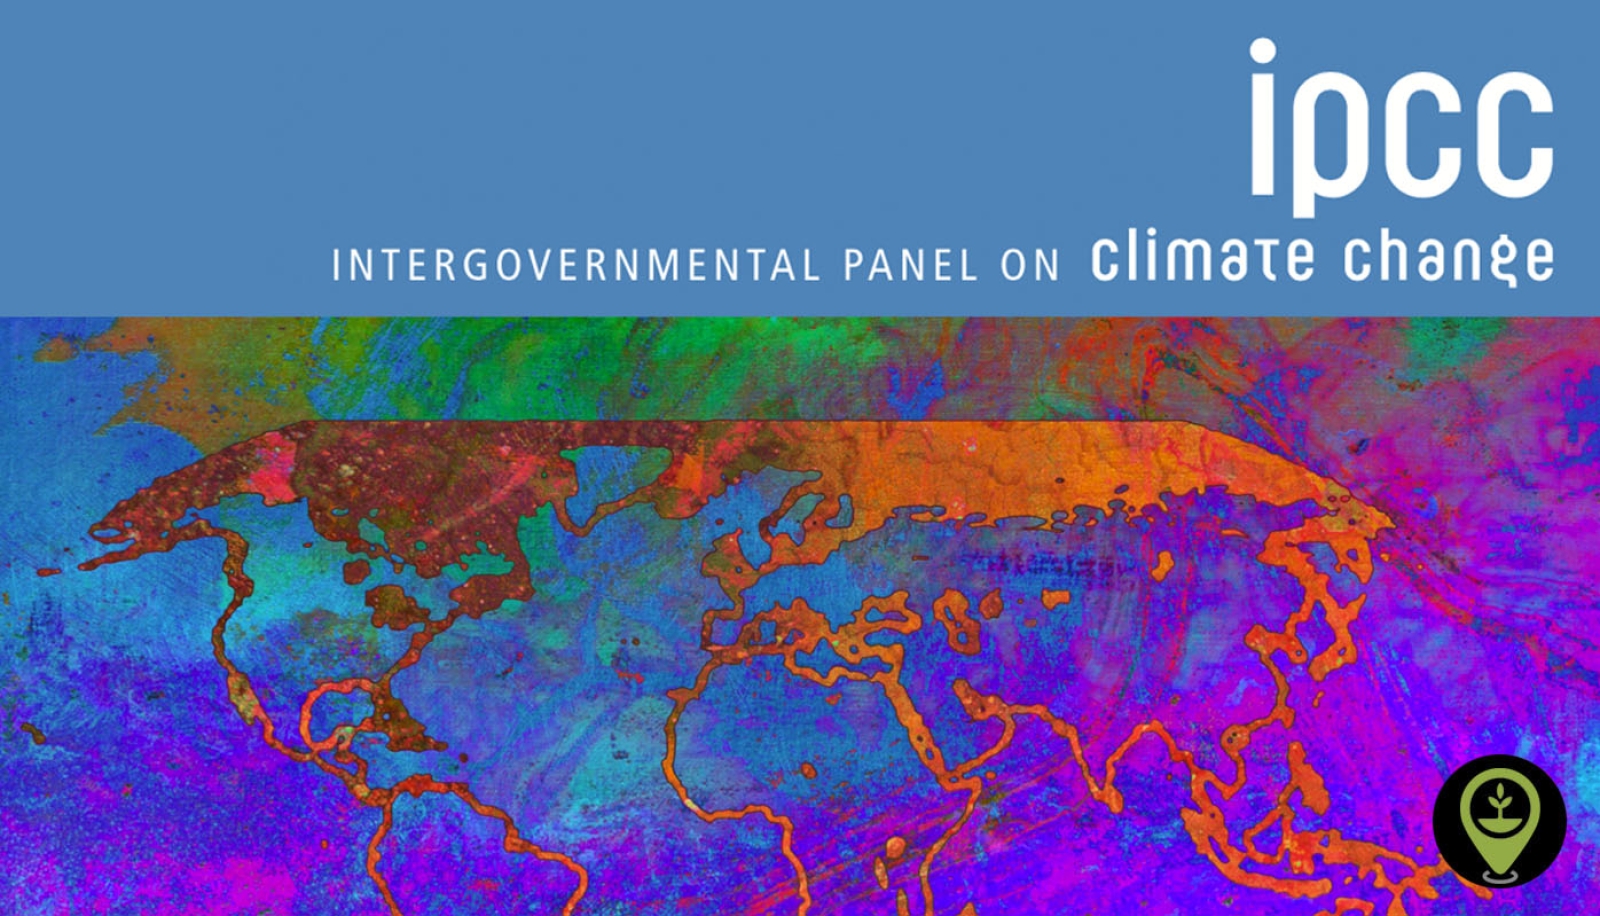 The IPCC has released the second part of the Sixth Assessment Report